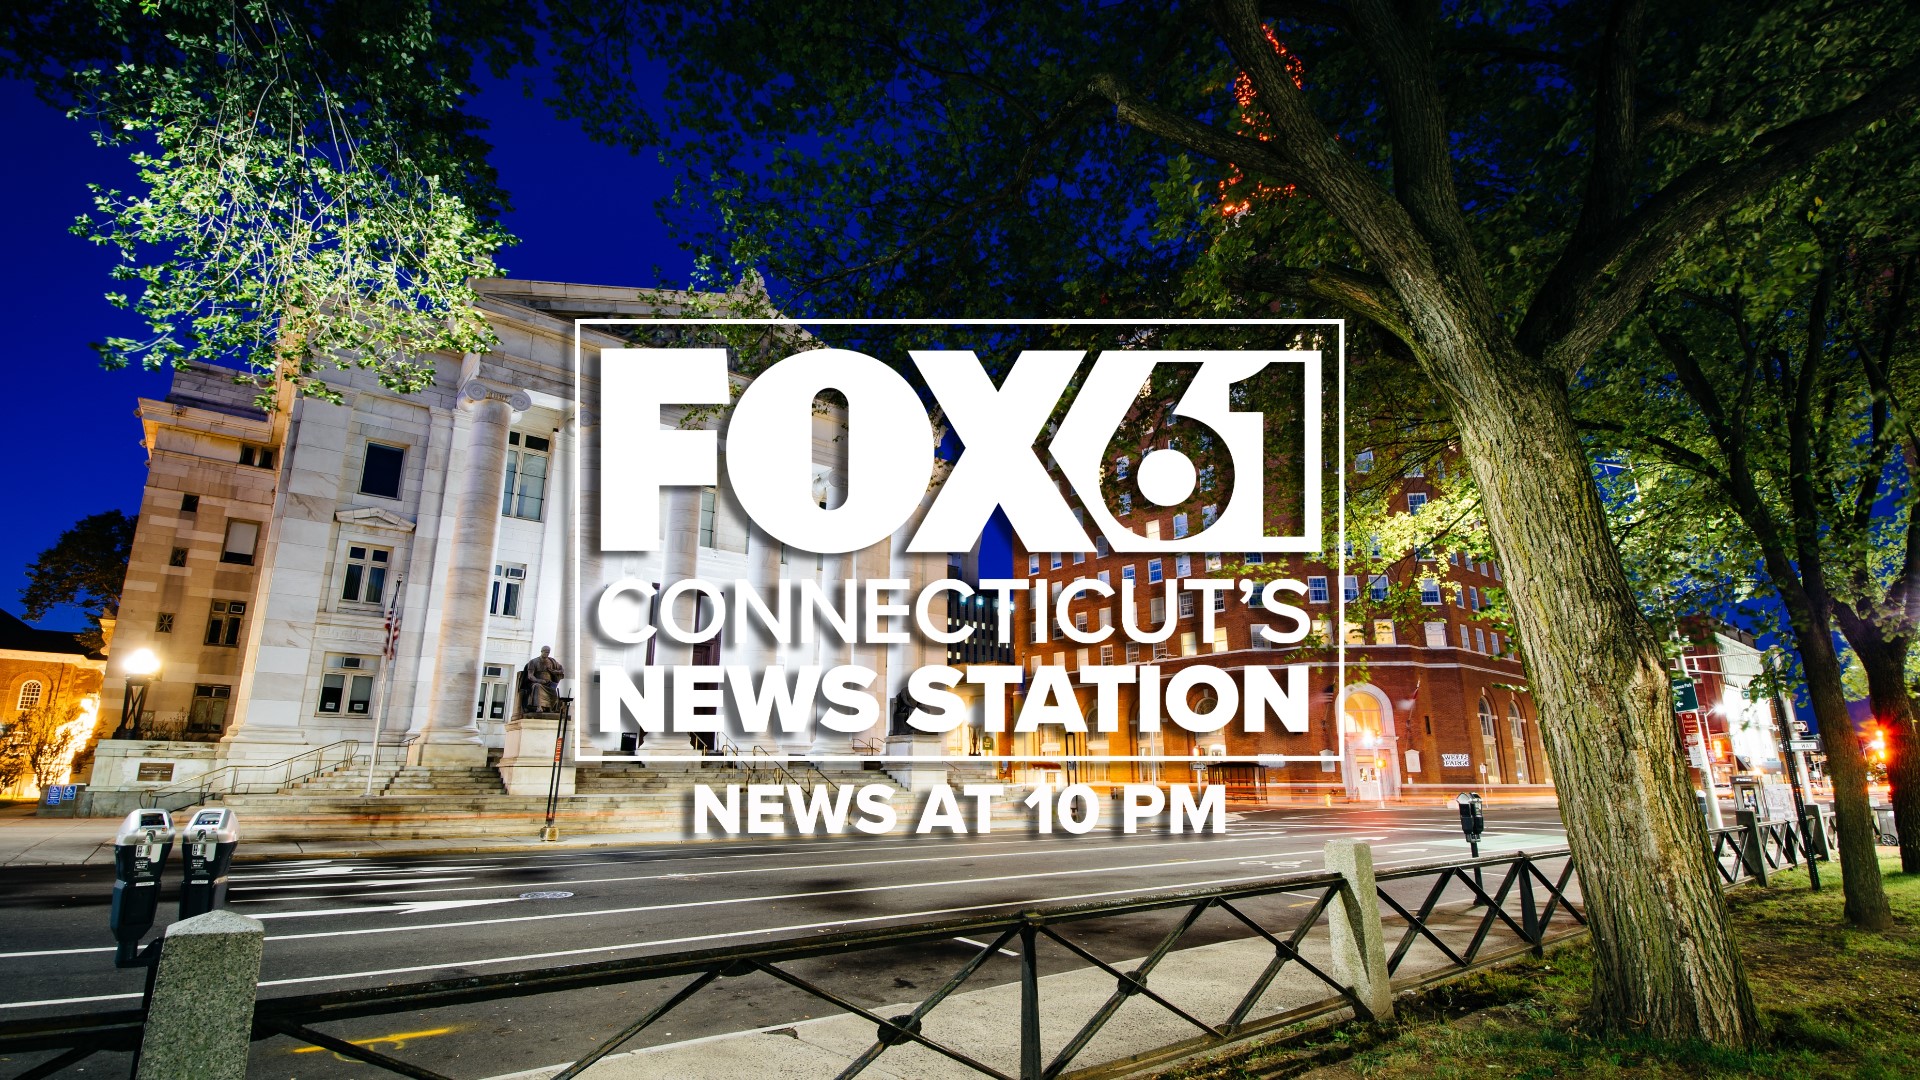 These are the top stories in Connecticut for May 26 at 10 p.m.